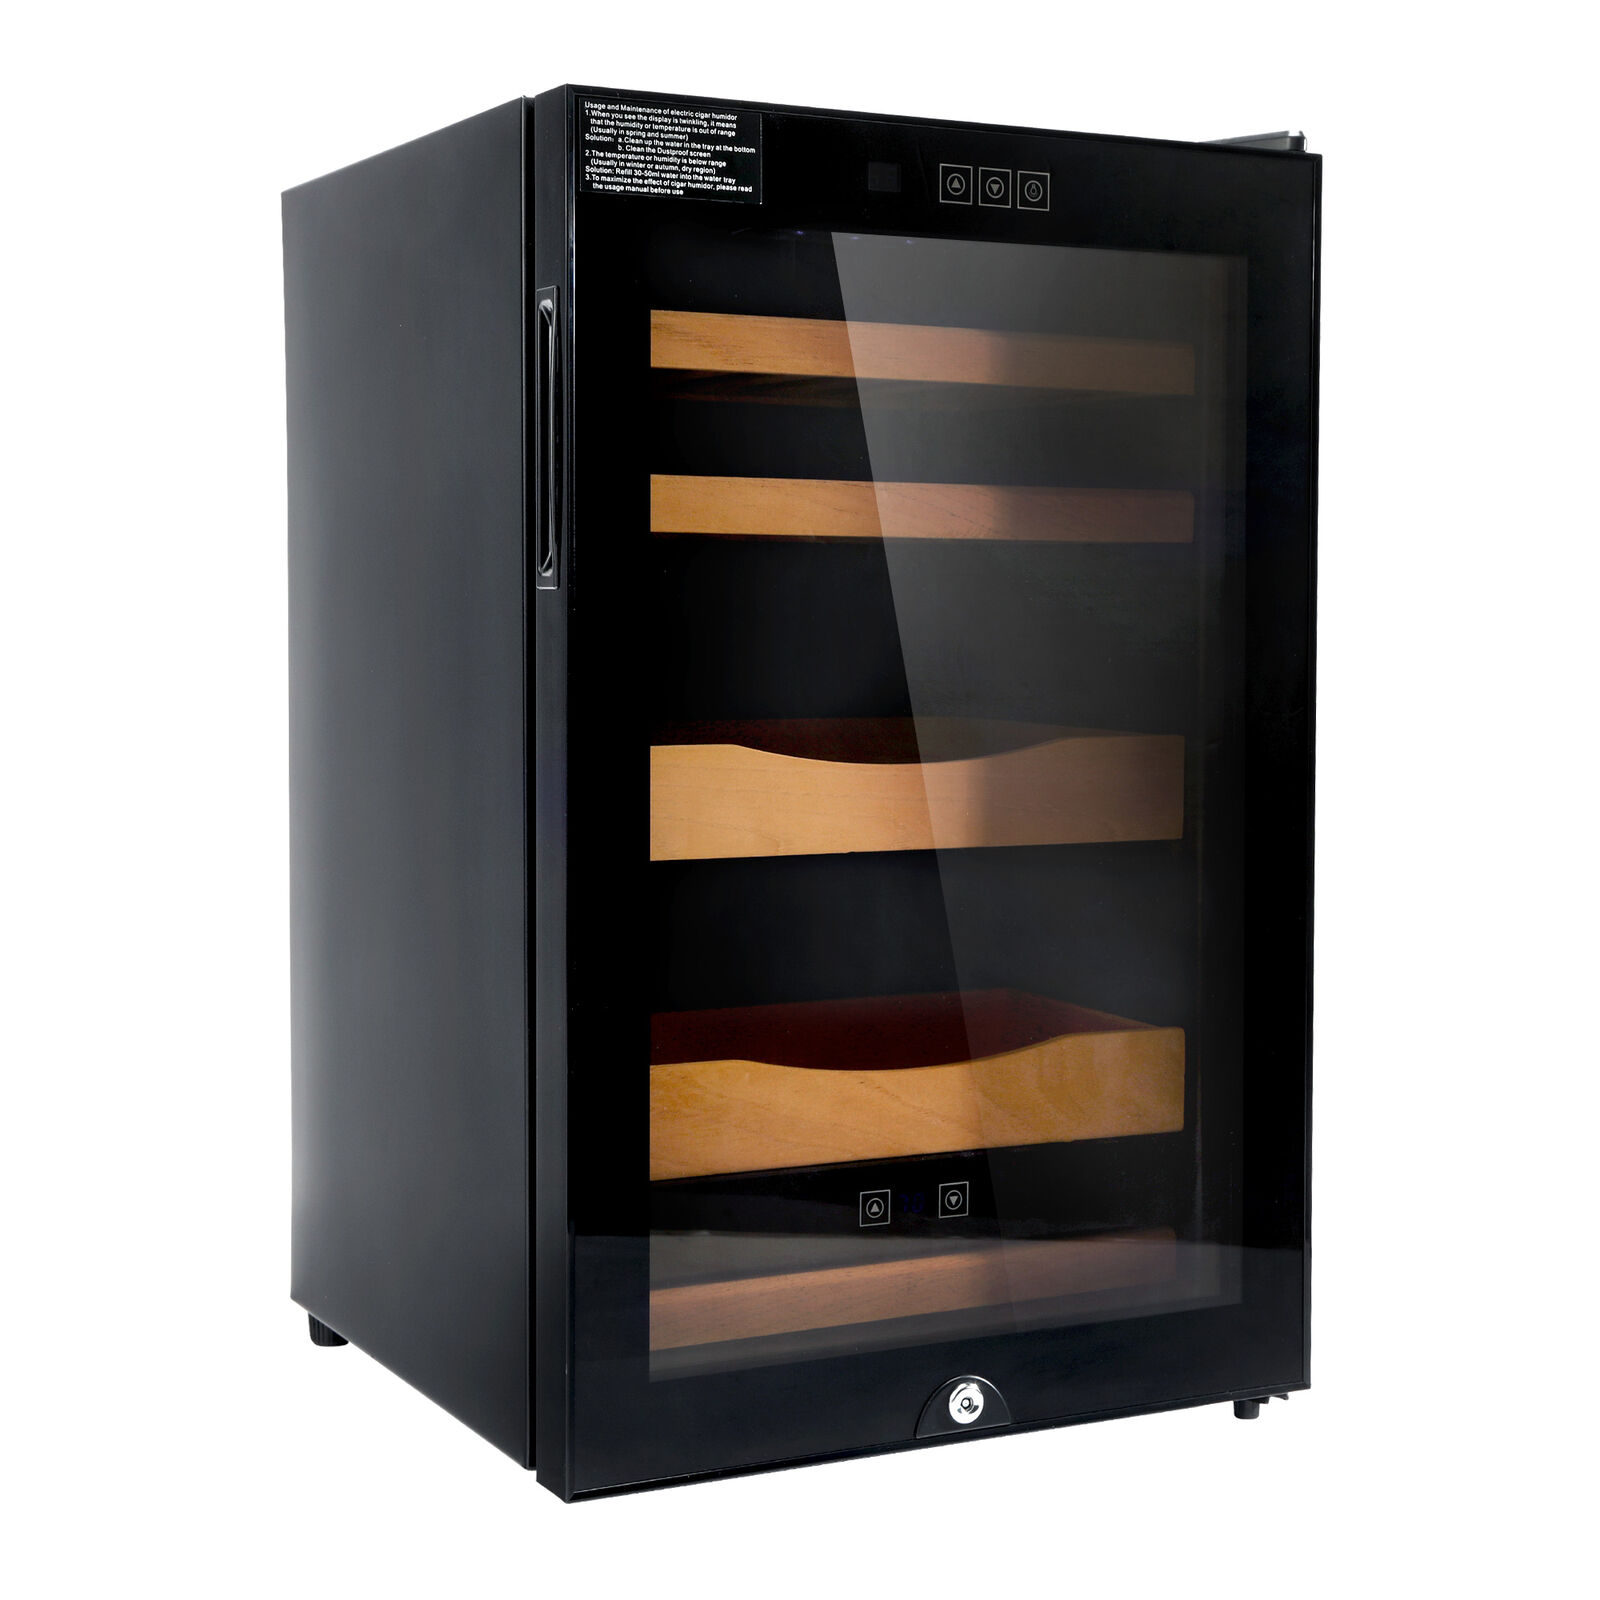 TCFUNDY Electronic Cigar Cooler Humidor Stable Temperature &Humidity 400Capacity